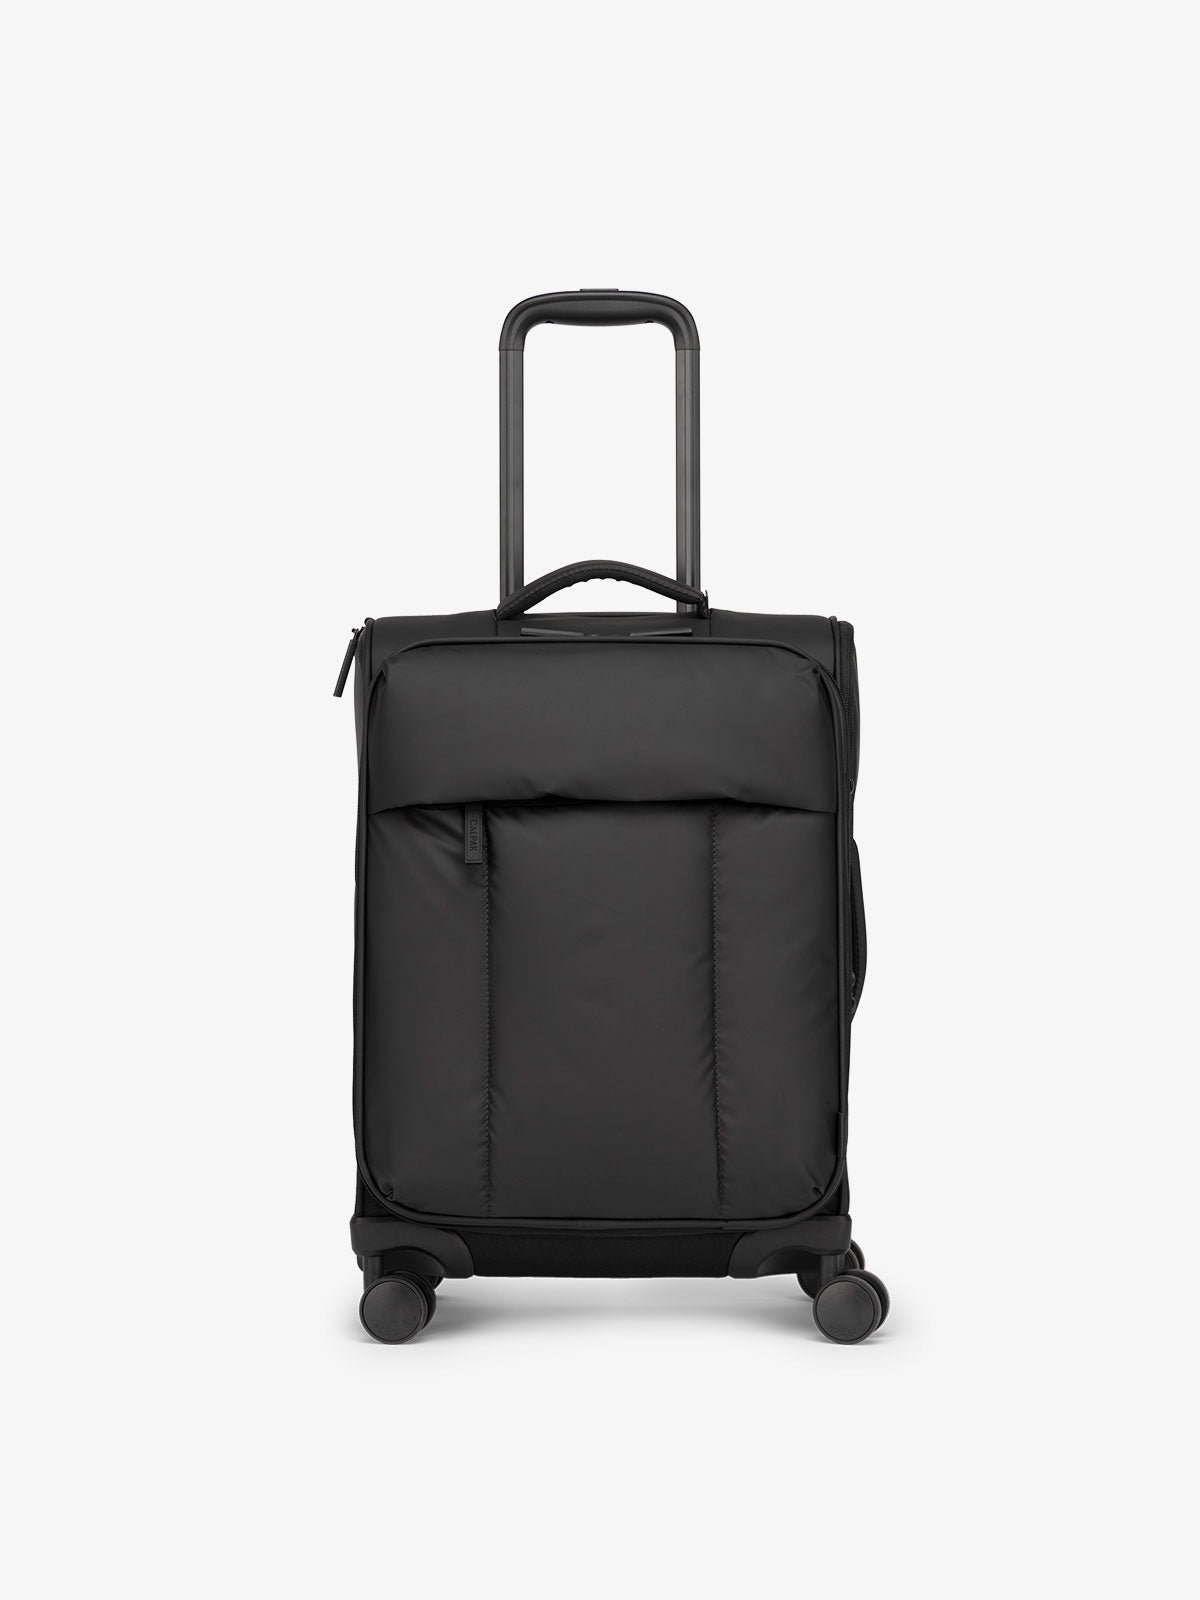 CALPAK Luka soft sided carry on luggage in black